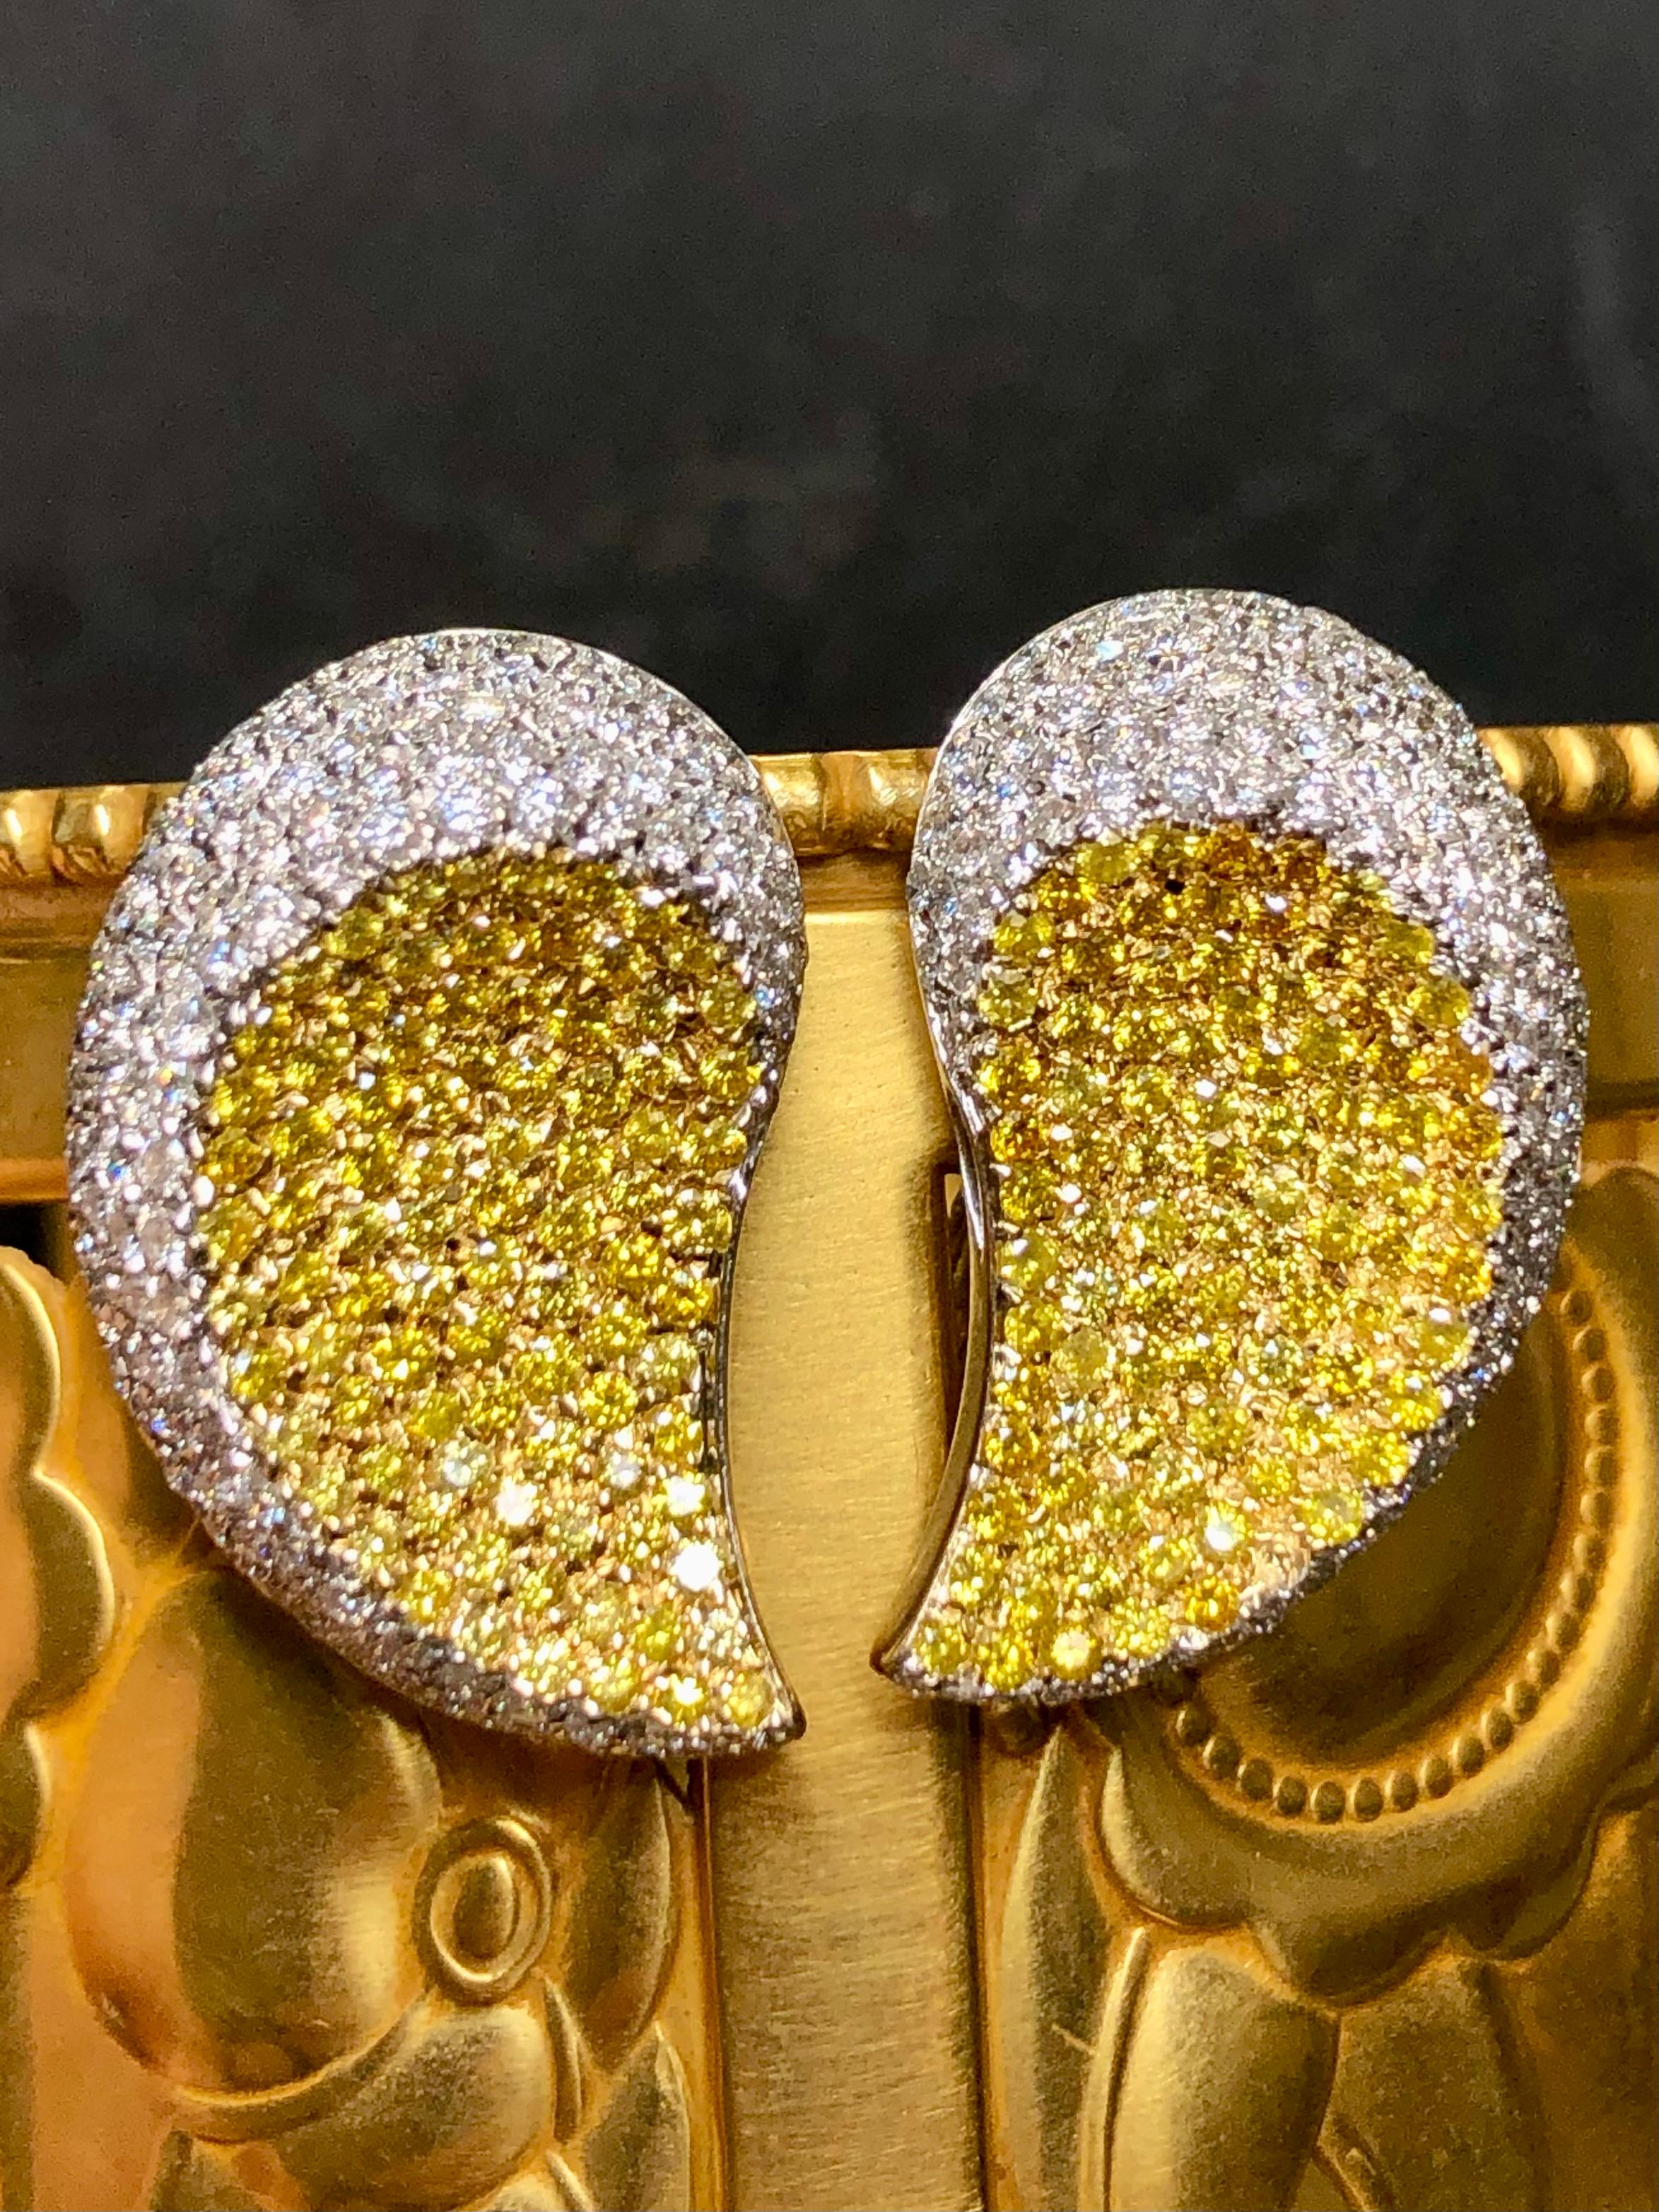 Meticulously crafted earrings by Italian maker, Cantamessa. They are done in 18K white gold and set with approximately 4.50cttw in G-H color Vs1-2 clarity round white diamonds as well as 2.10cttw in fancy intense yellow diamonds (we assume color